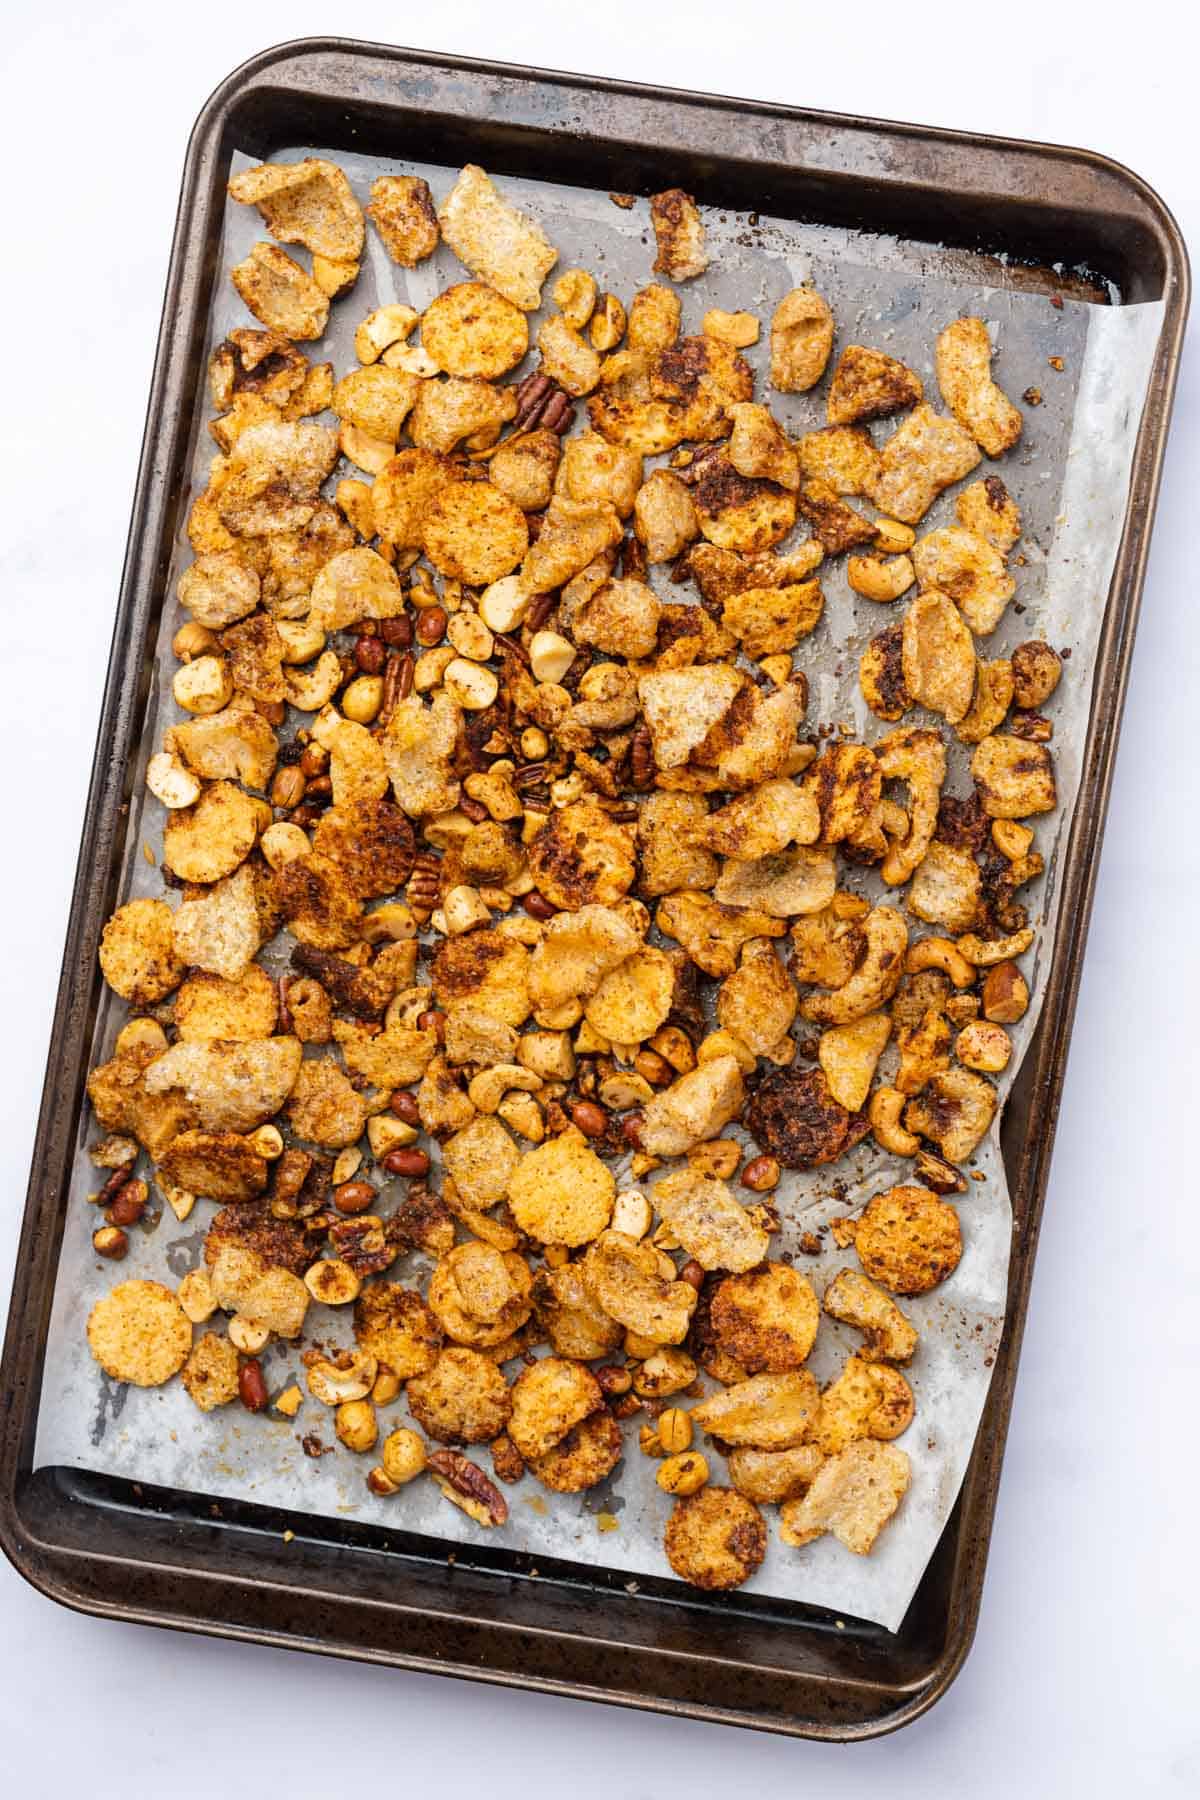 baked keto snack mix with pork rinds on a baking sheet